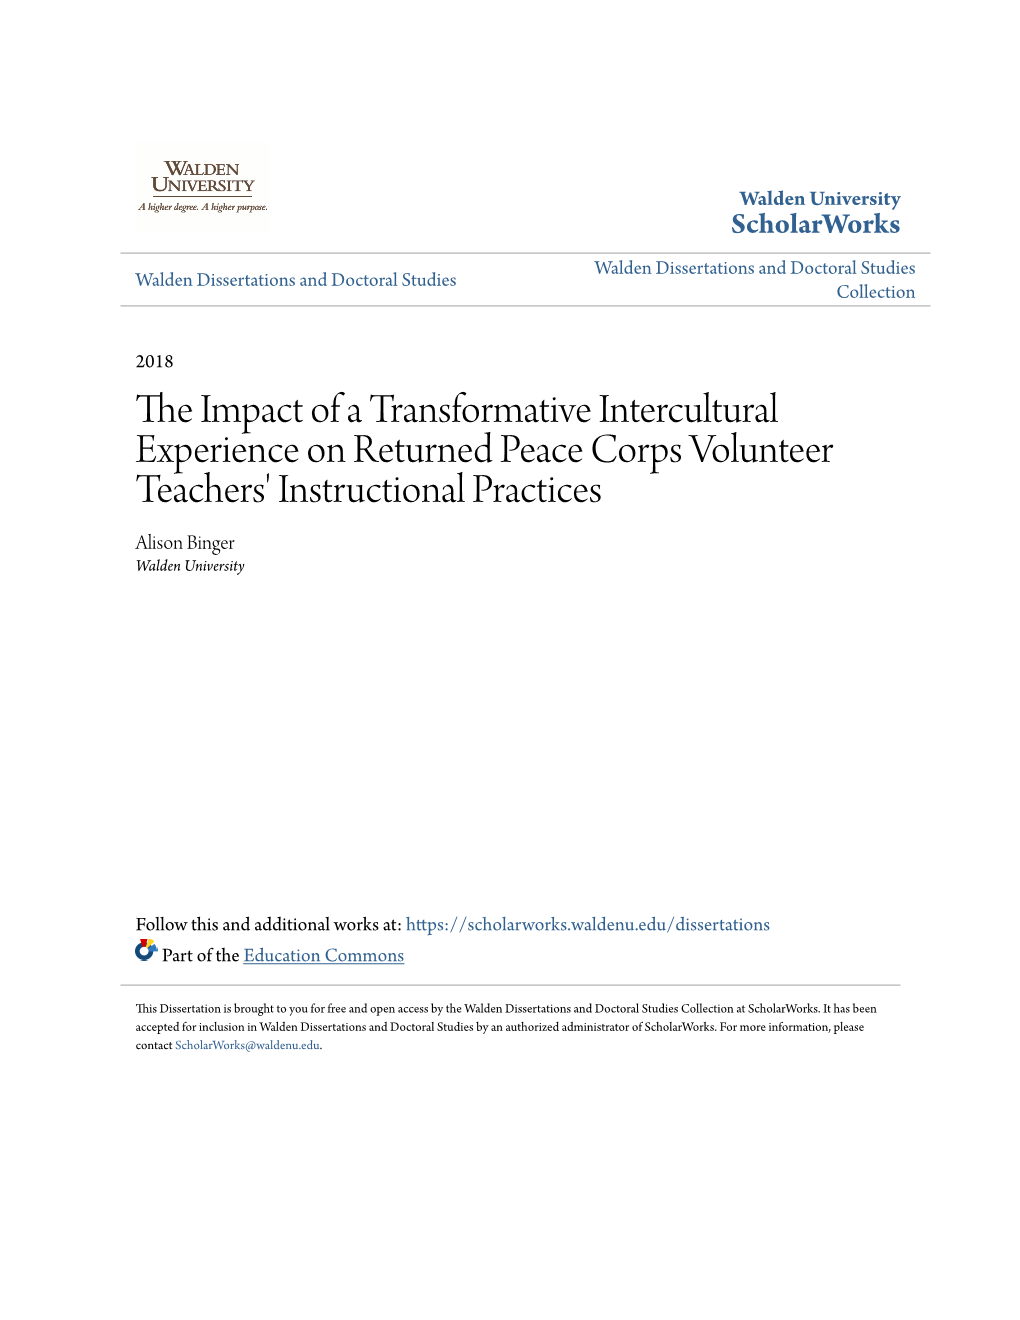 The Impact of a Transformative Intercultural Experience on Returned Peace Corps